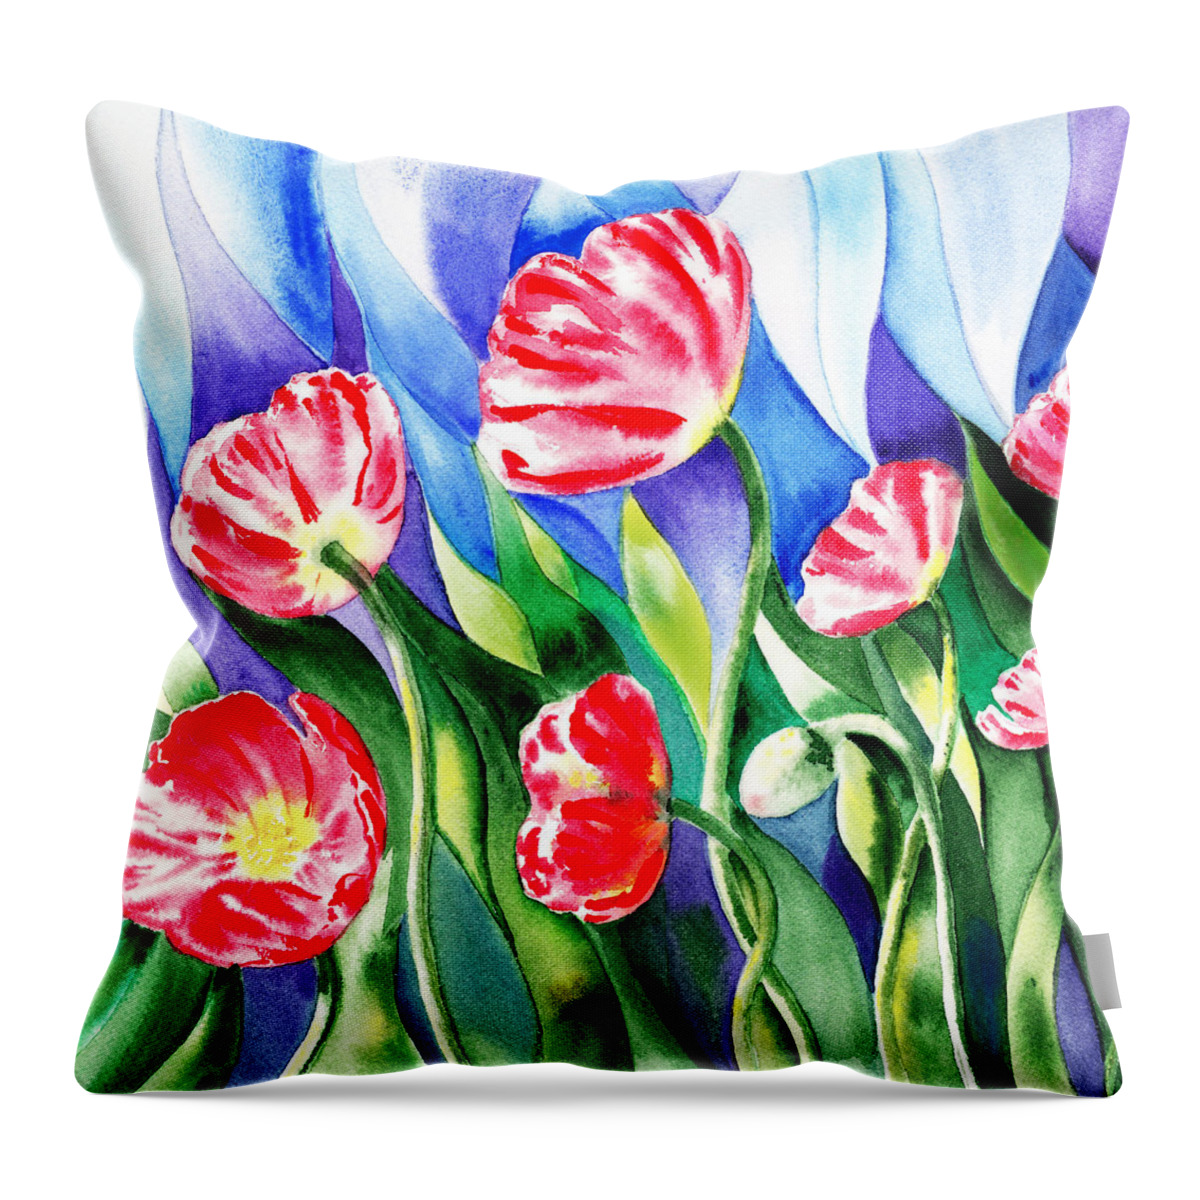 Red Throw Pillow featuring the painting Poppies Field Square Quilt by Irina Sztukowski